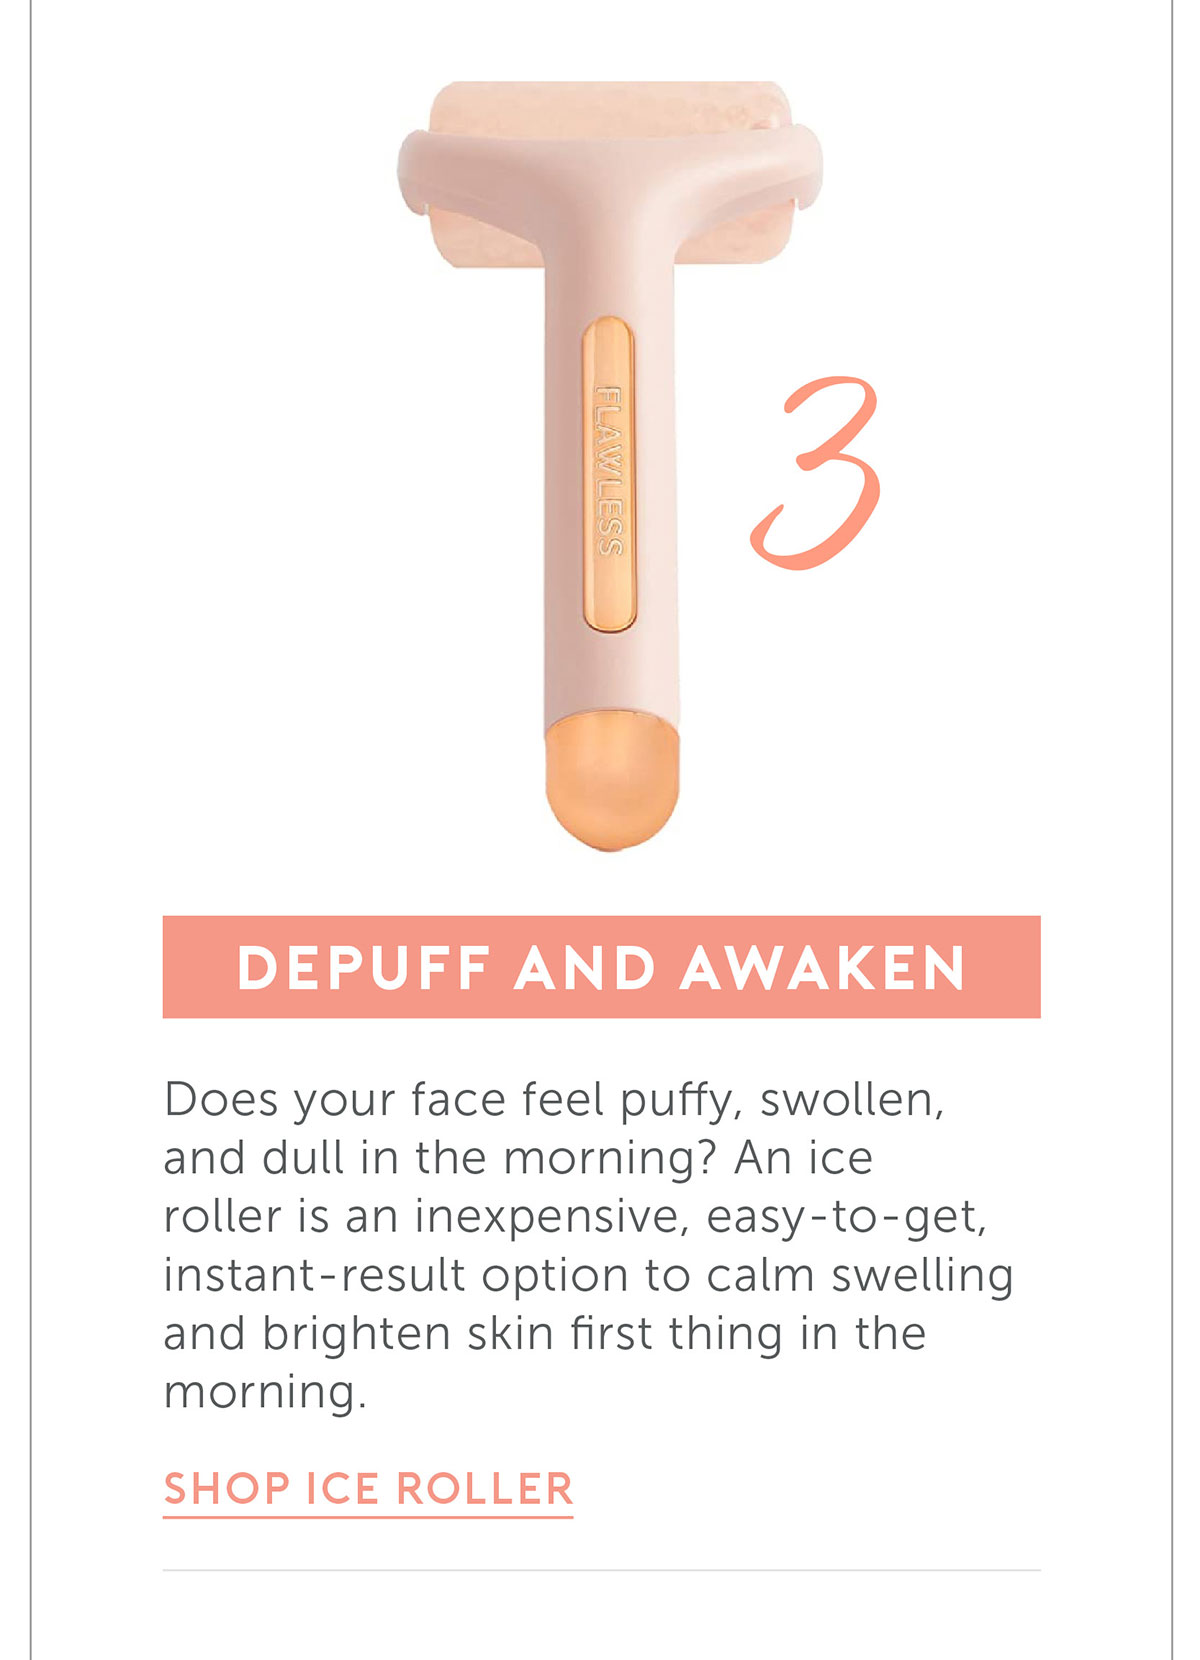 Depuff and awaken Does your face feel puffy, swollen, and dull in the morning? An ice roller is an inexpensive, easy-to-get, instant-result option to calm swelling and brighten skin first thing in the morning. 